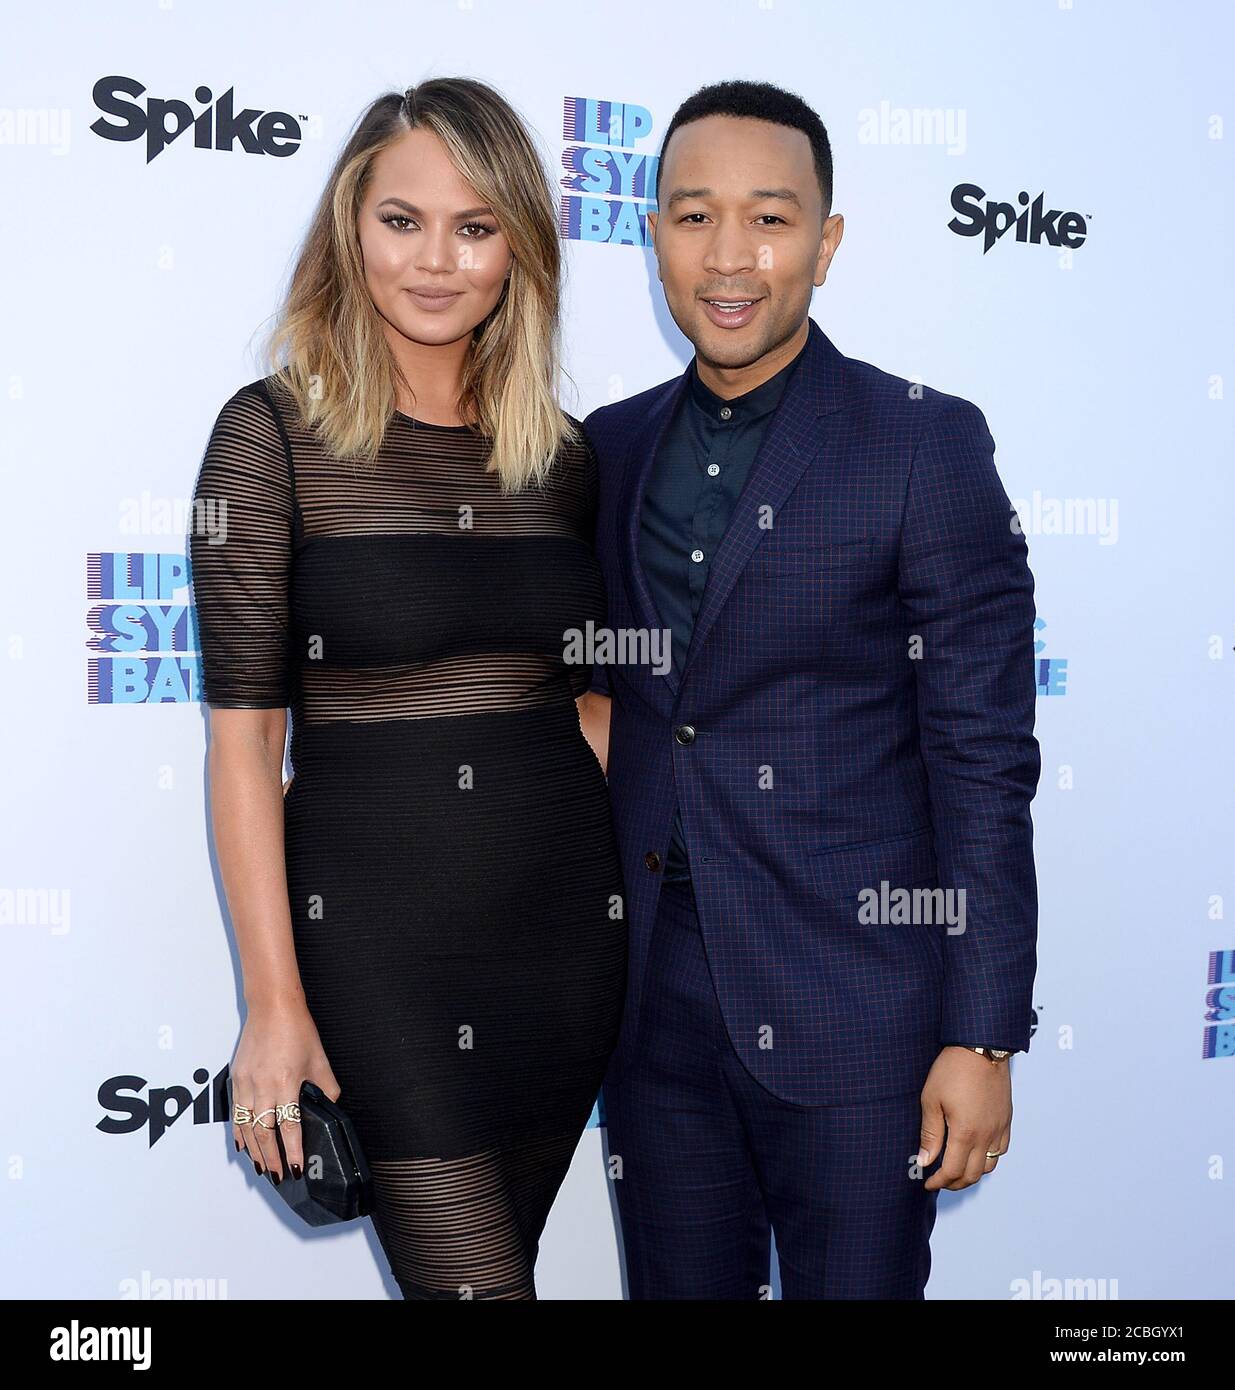 NORTH HOLLYWOOD, CA - JUNE 14: Chrissy Teigen and John Legend arrives at the FYC Event - Spike's 'Lip Sync Battle' at Saban Media Center on June 14, 2016 in North Hollywood, California. People: Chrissy Teigen and John Legend Credit: Storms Media Group/Alamy Live News Stock Photo